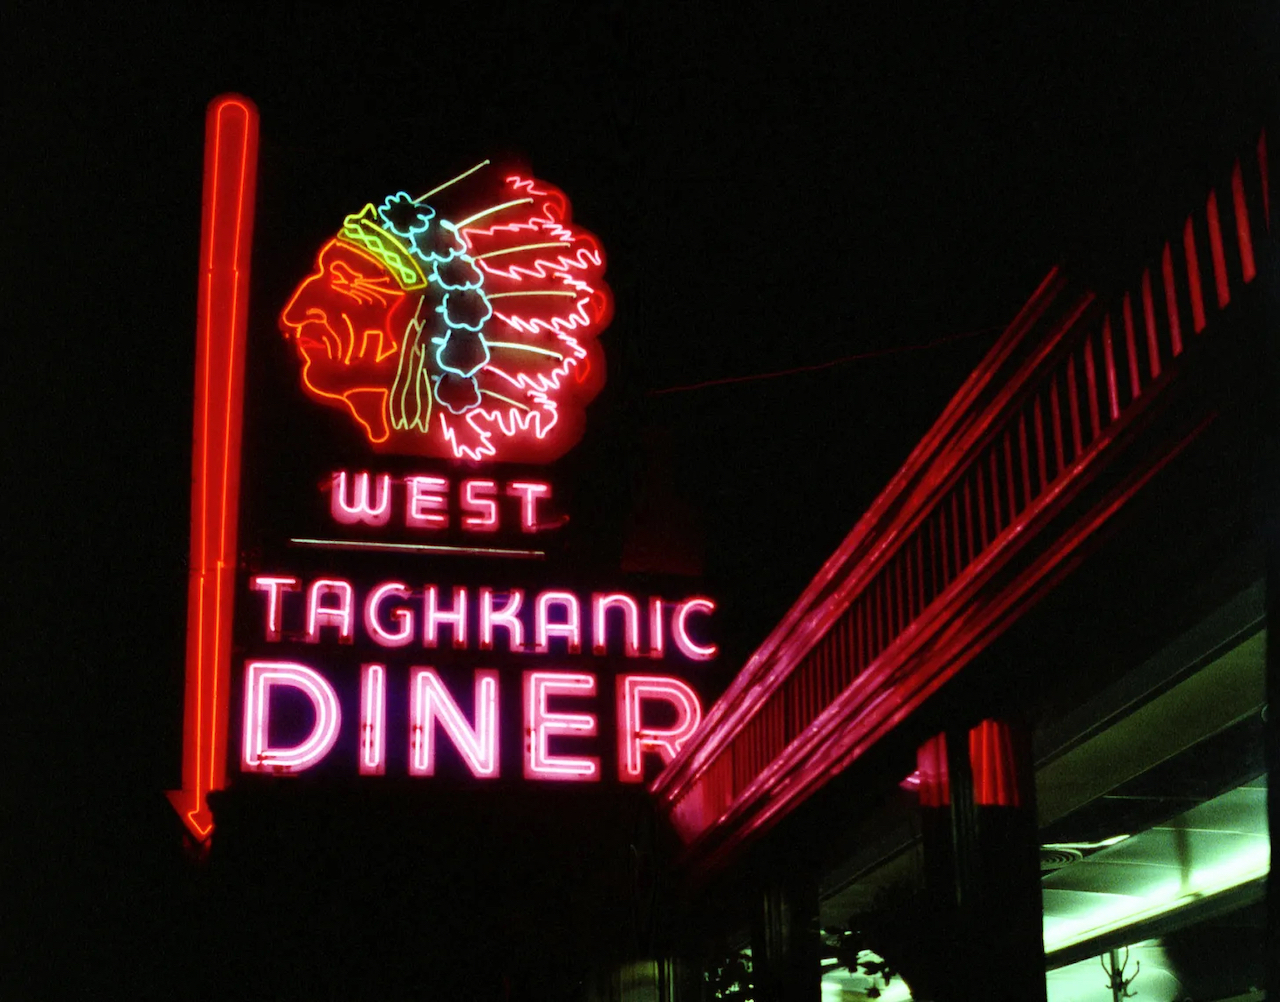 Neon_Sign_West_Taghkanic_Diner